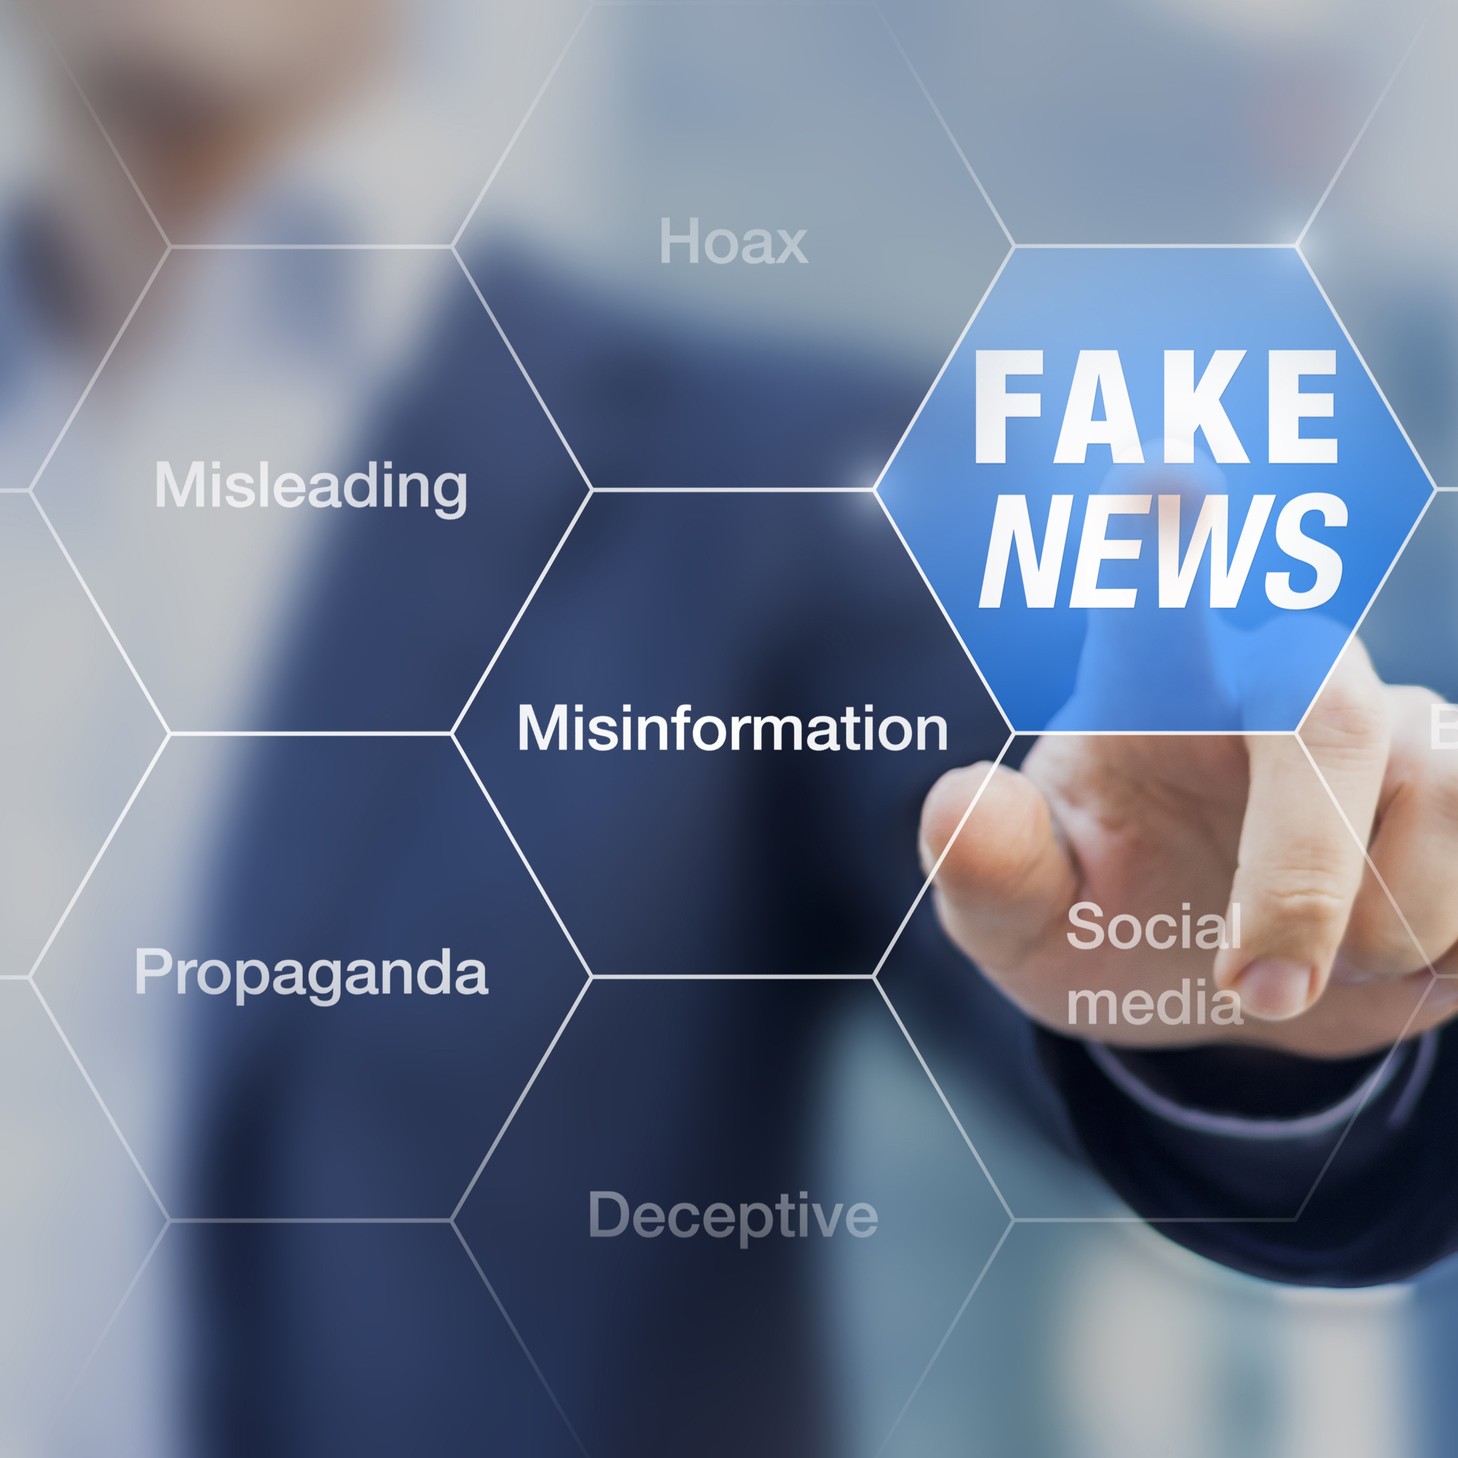 man pointing to various words including "fake news, misinformation, misleading"